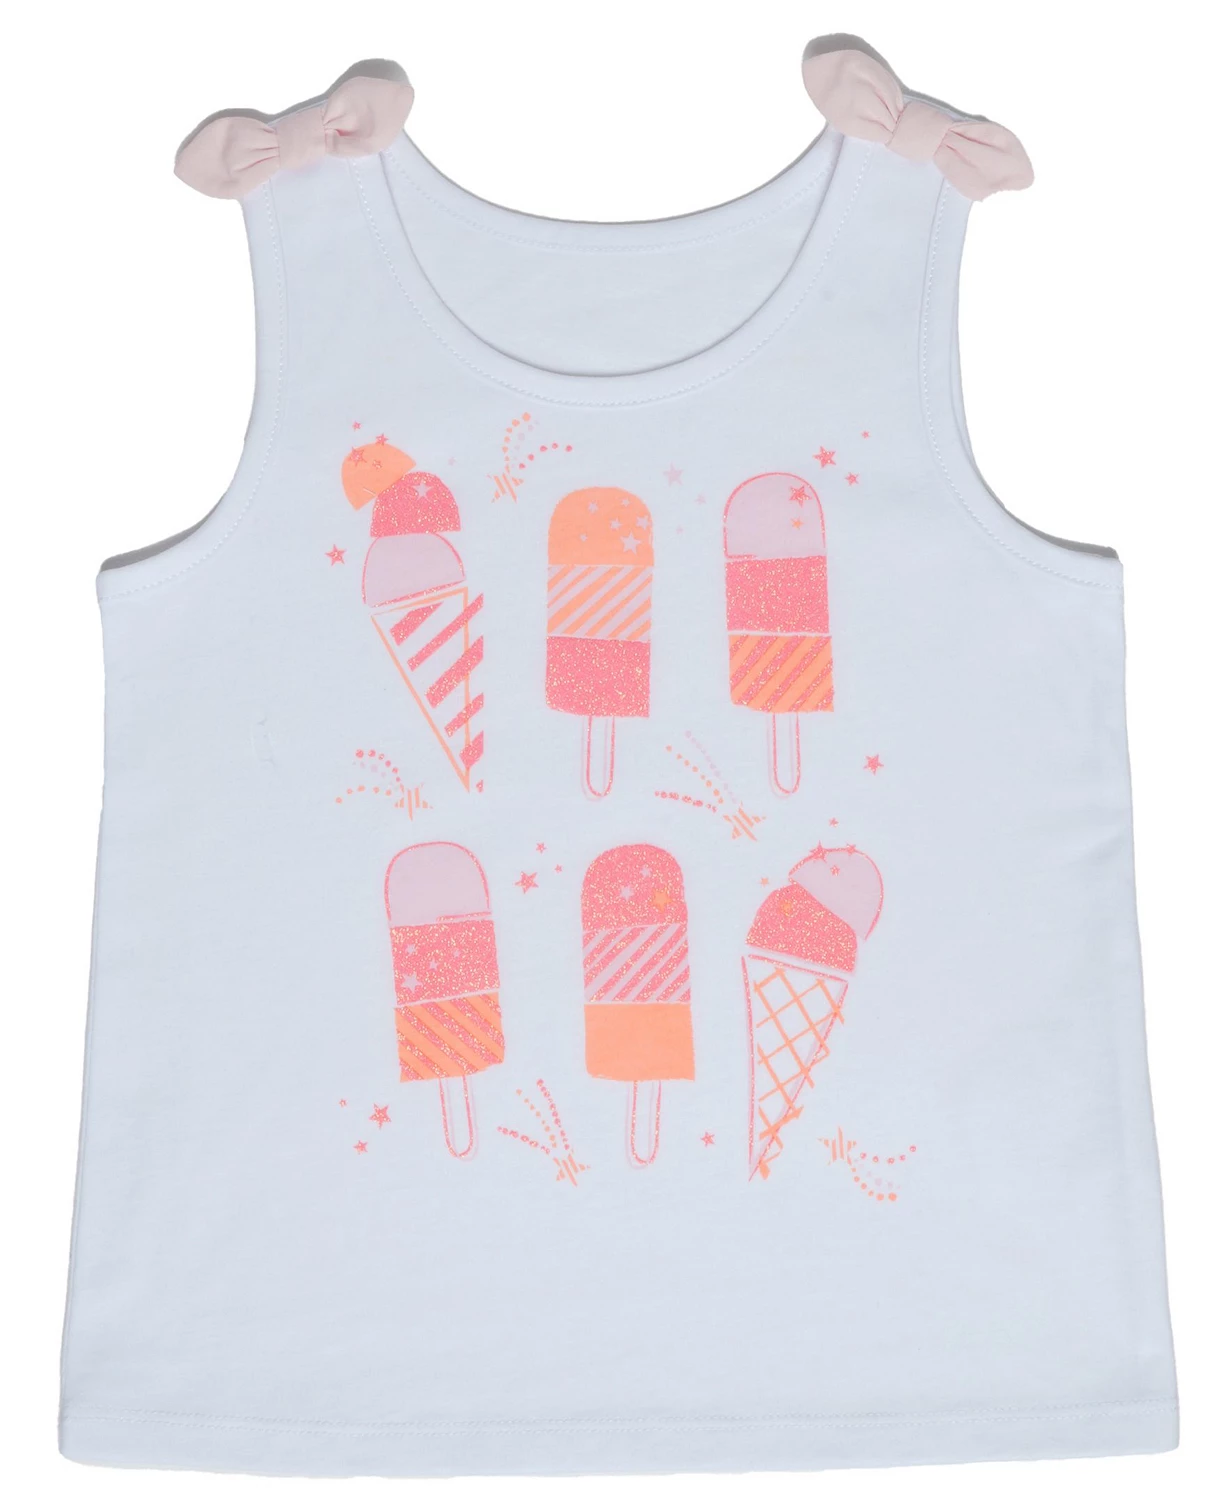 17536035 fpx - Girls Tank Tops at Macys for $3.16